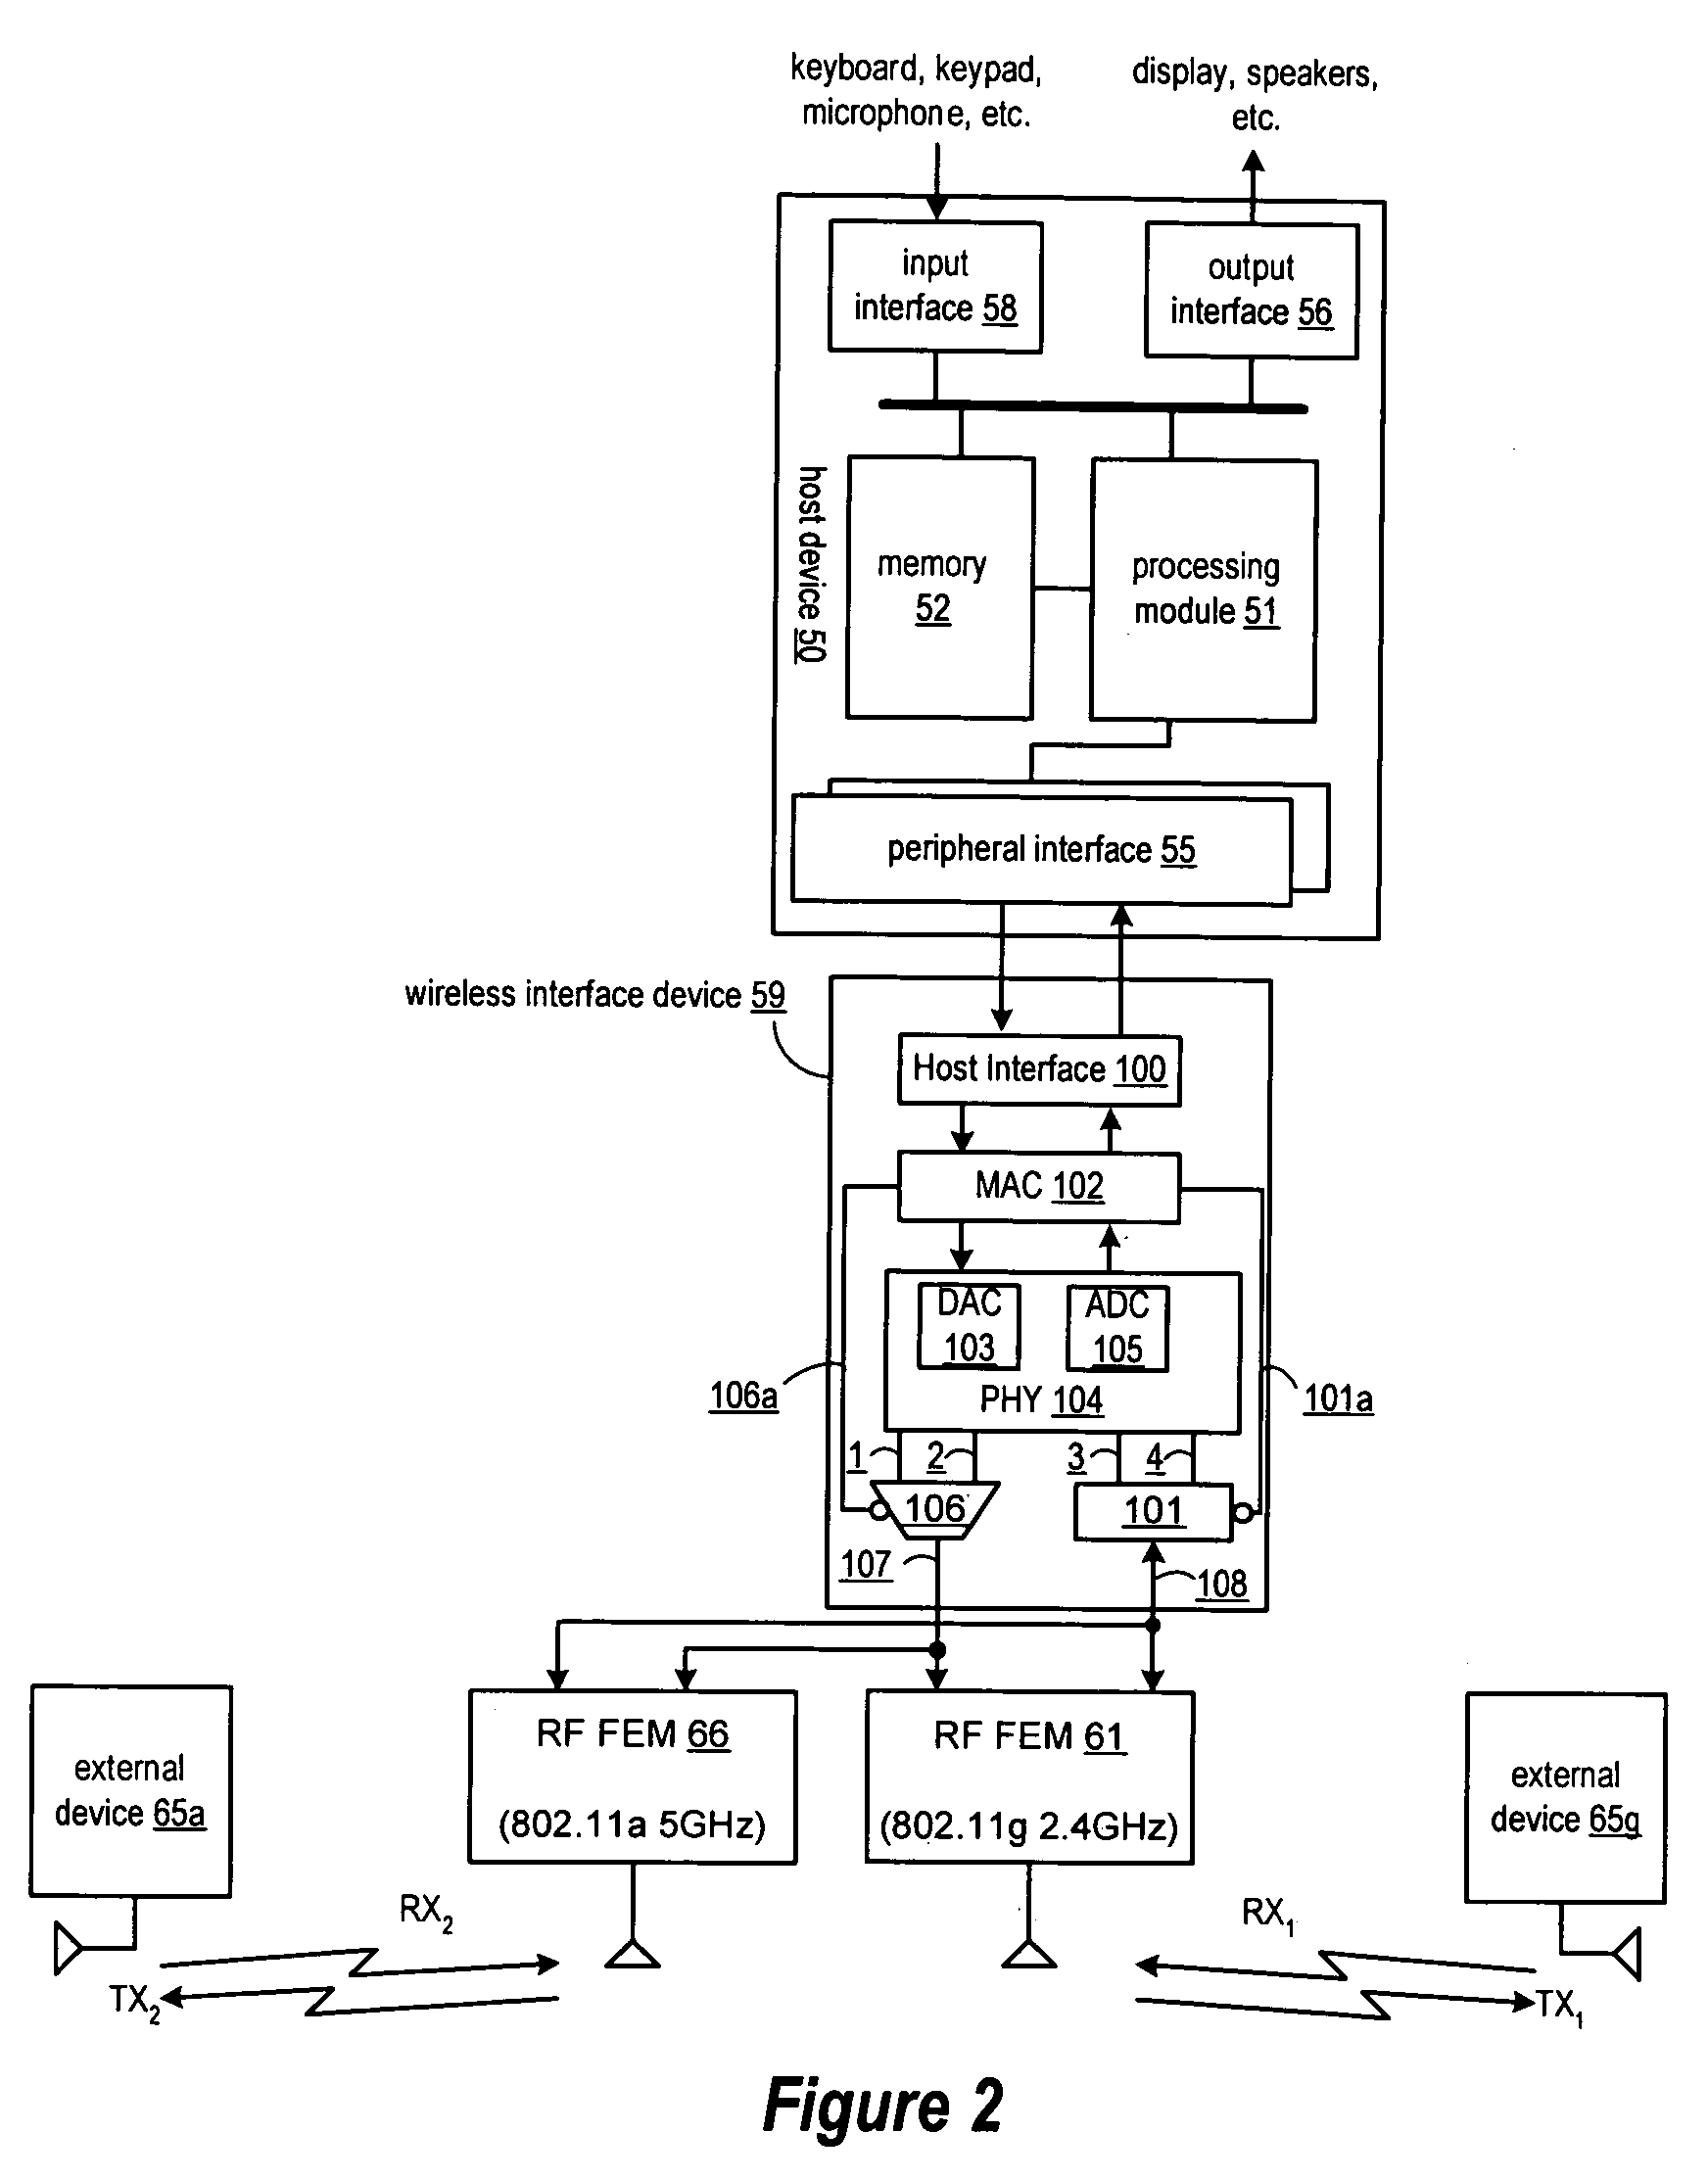 Antenna configuration for wireless communication device